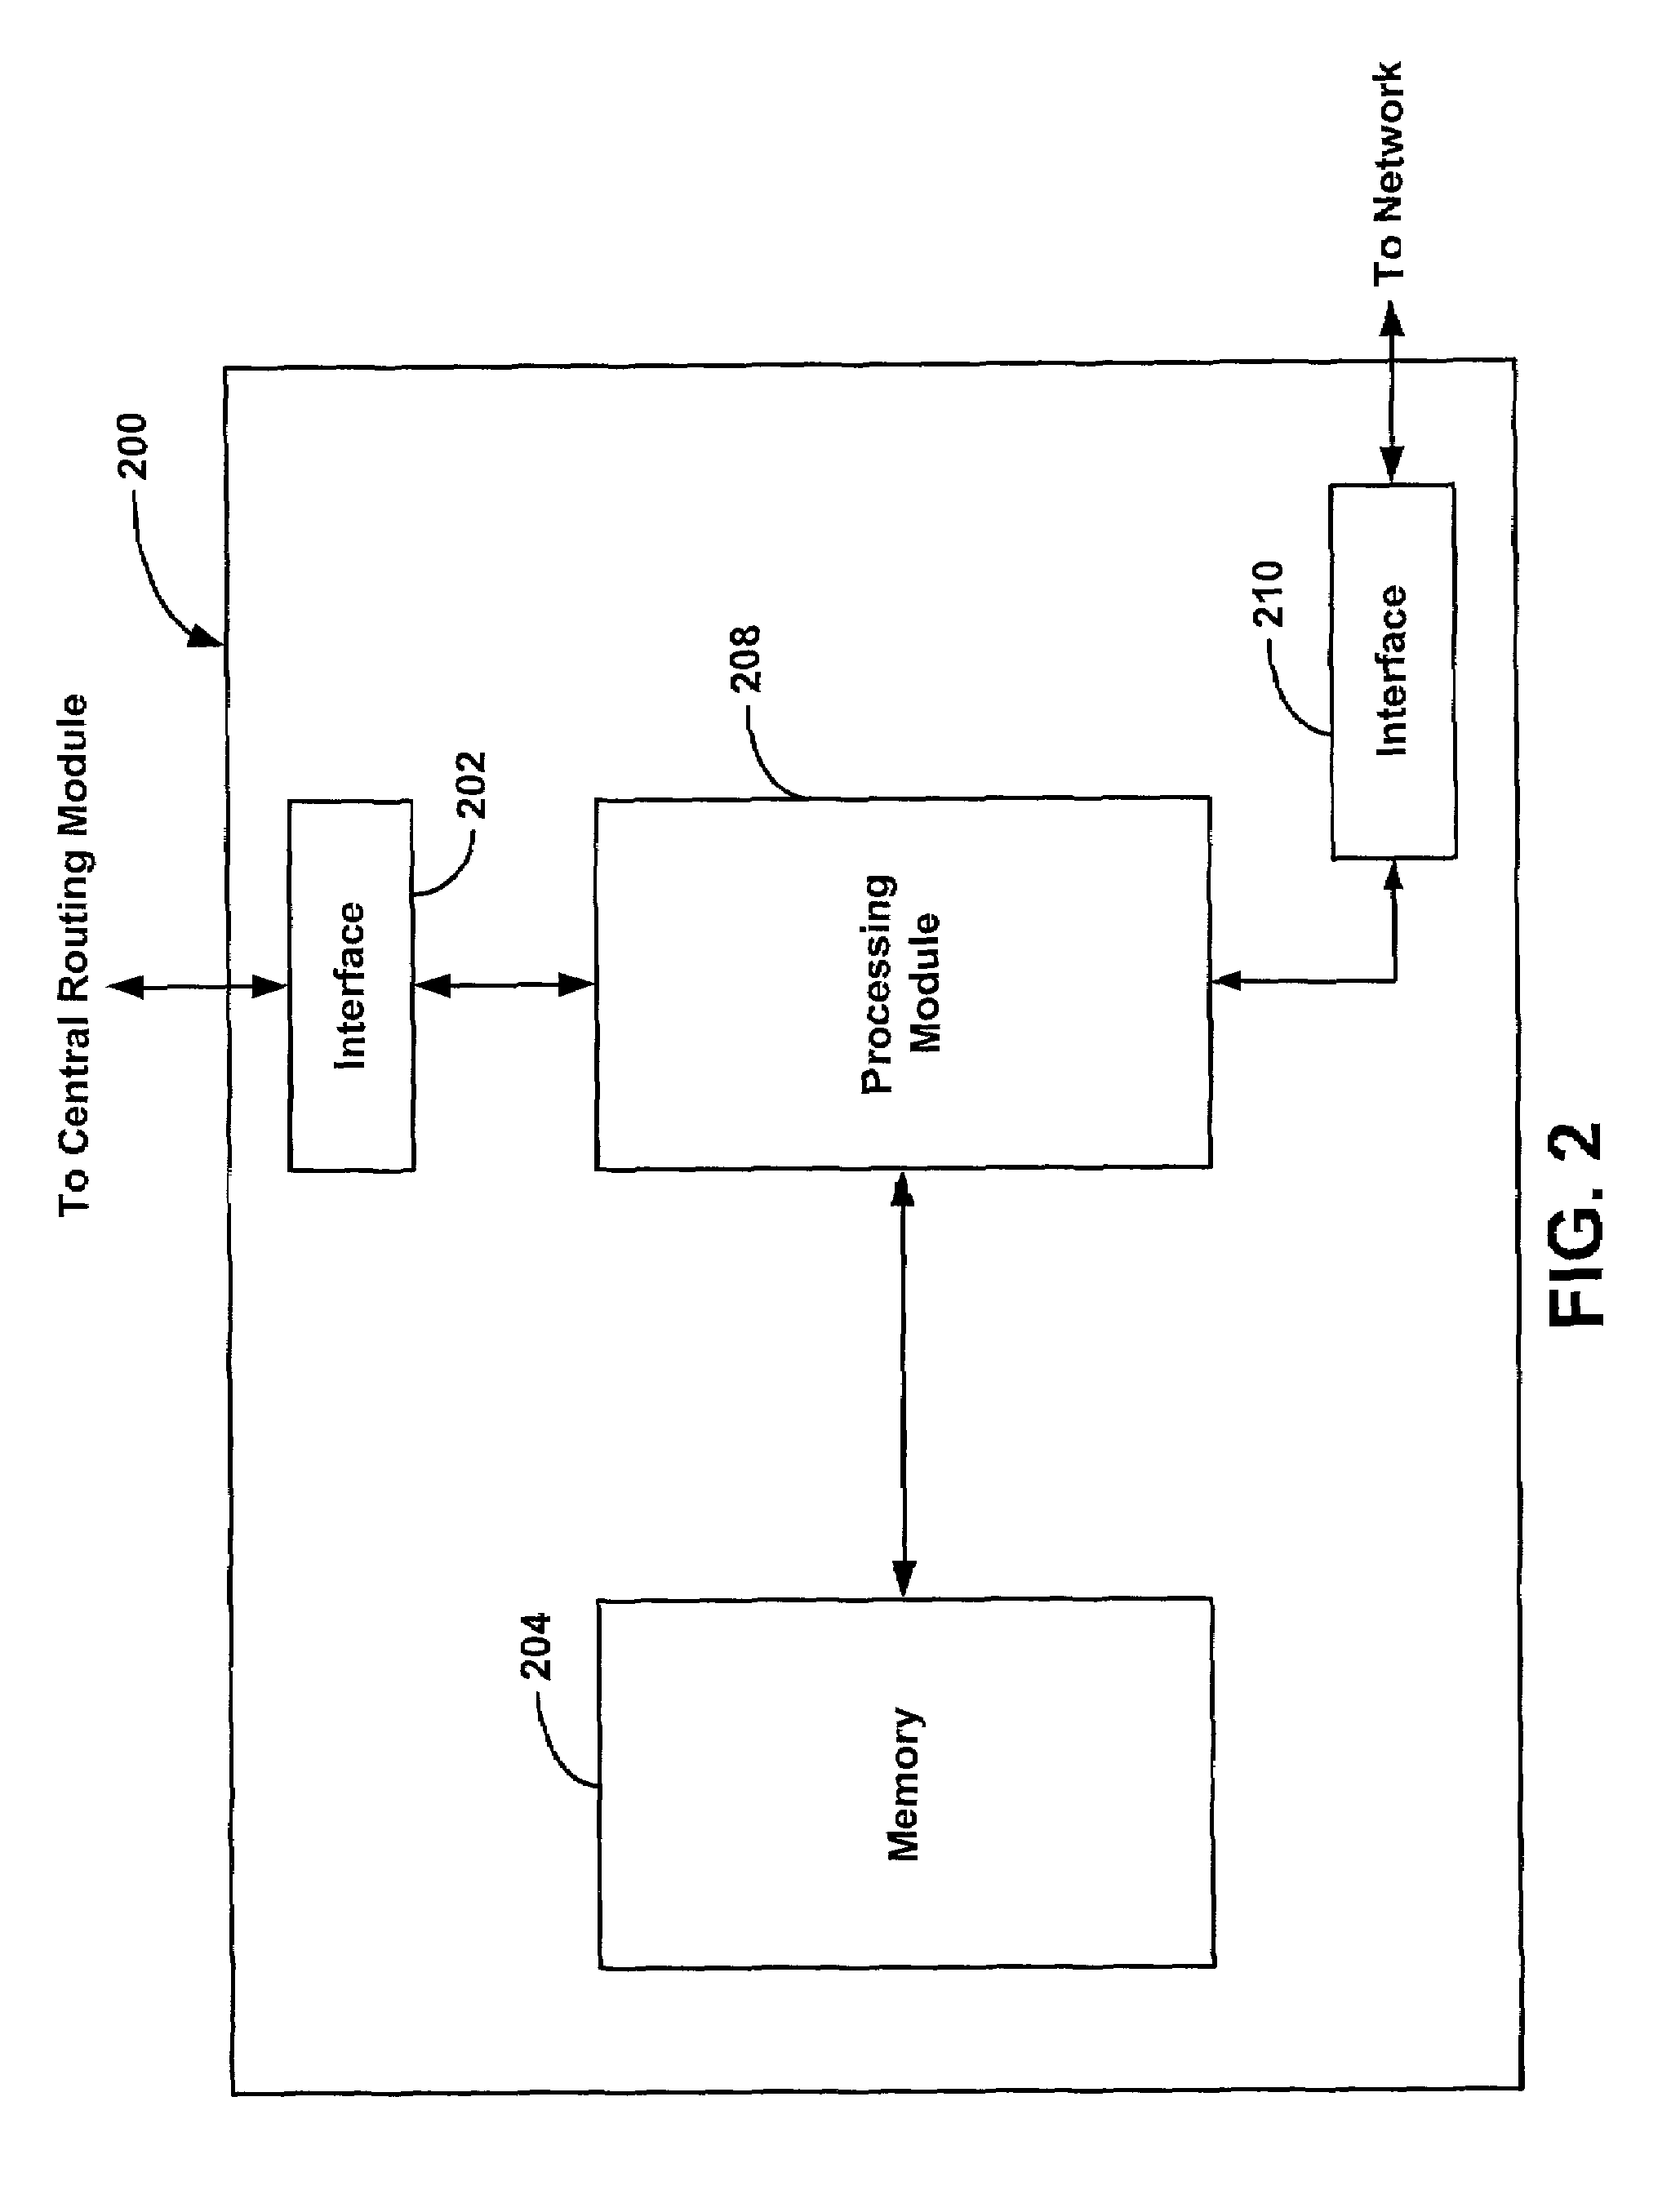 System and method for providing masquerading using a multiprotocol label switching